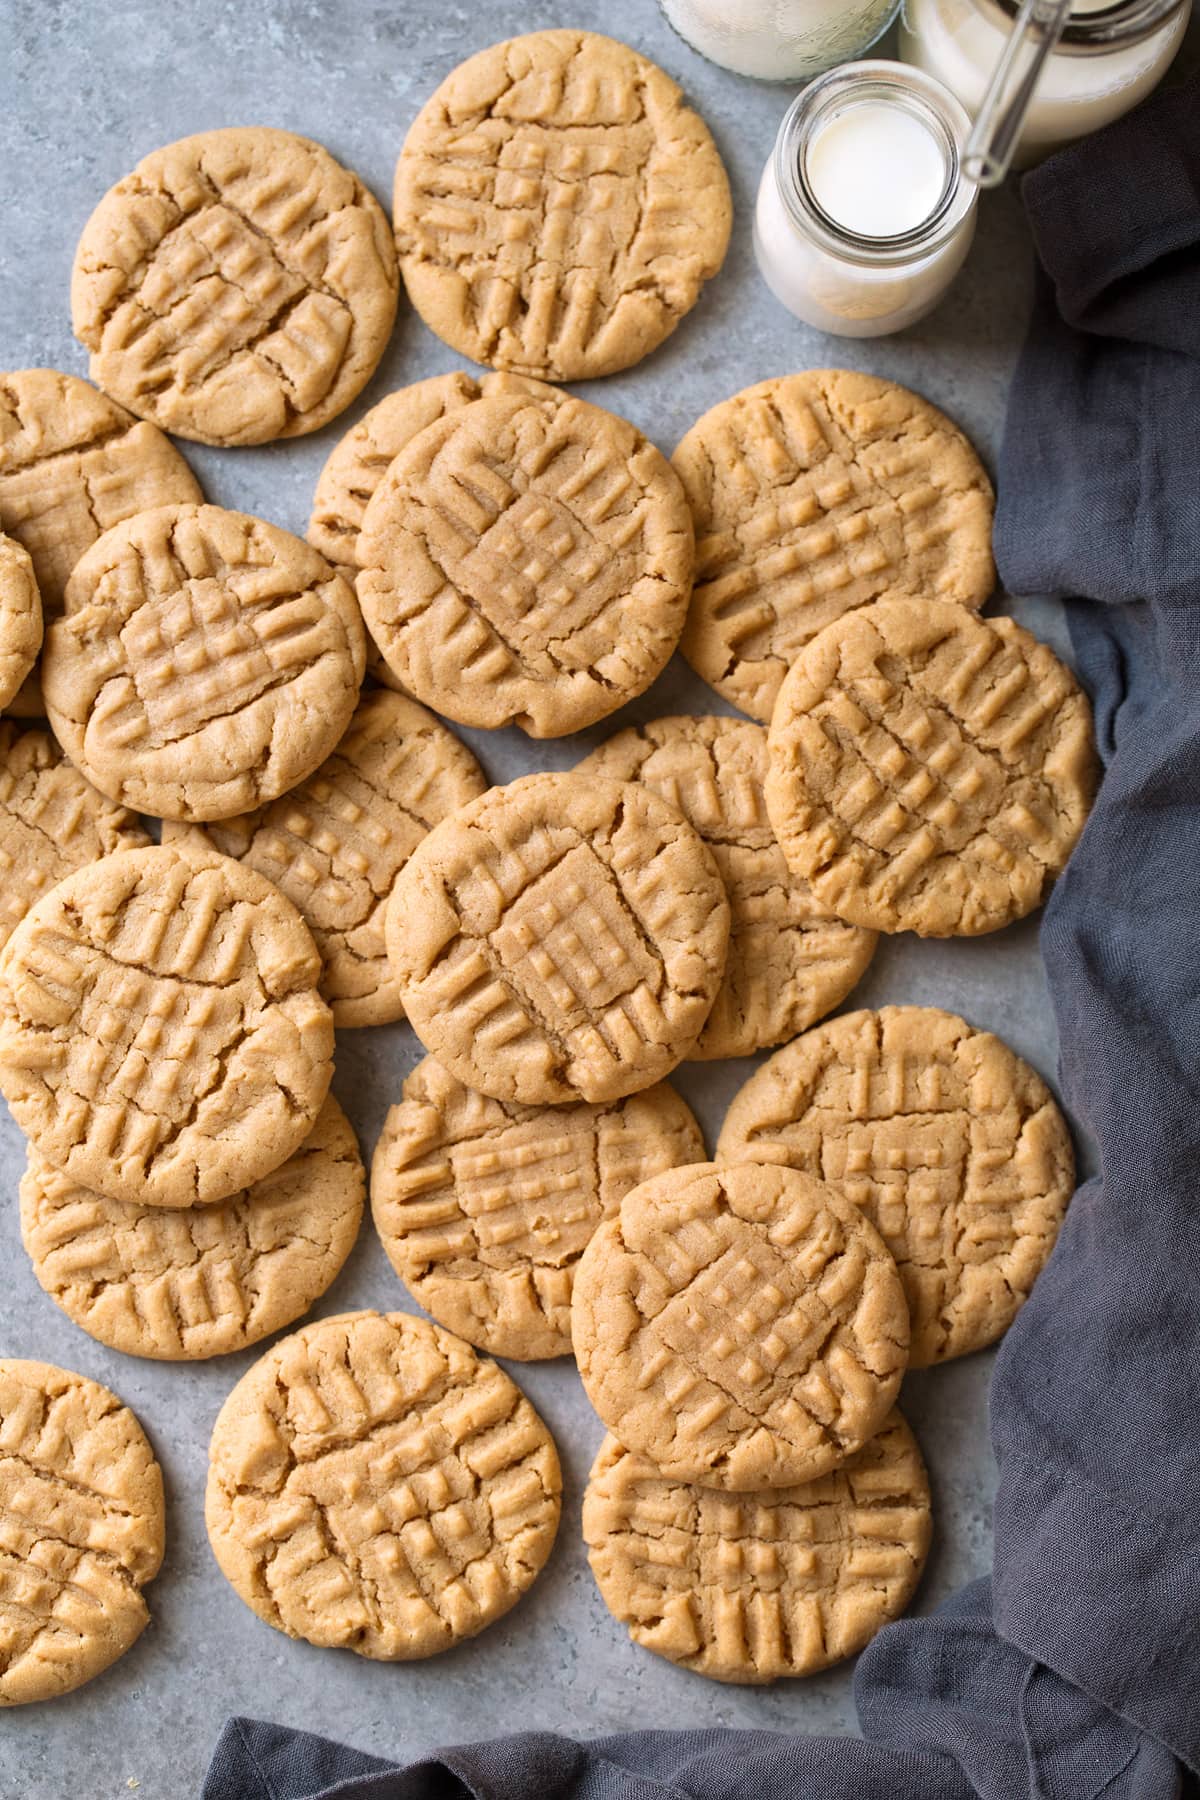 Easy to make peanut butter cookies laying on tabletop.